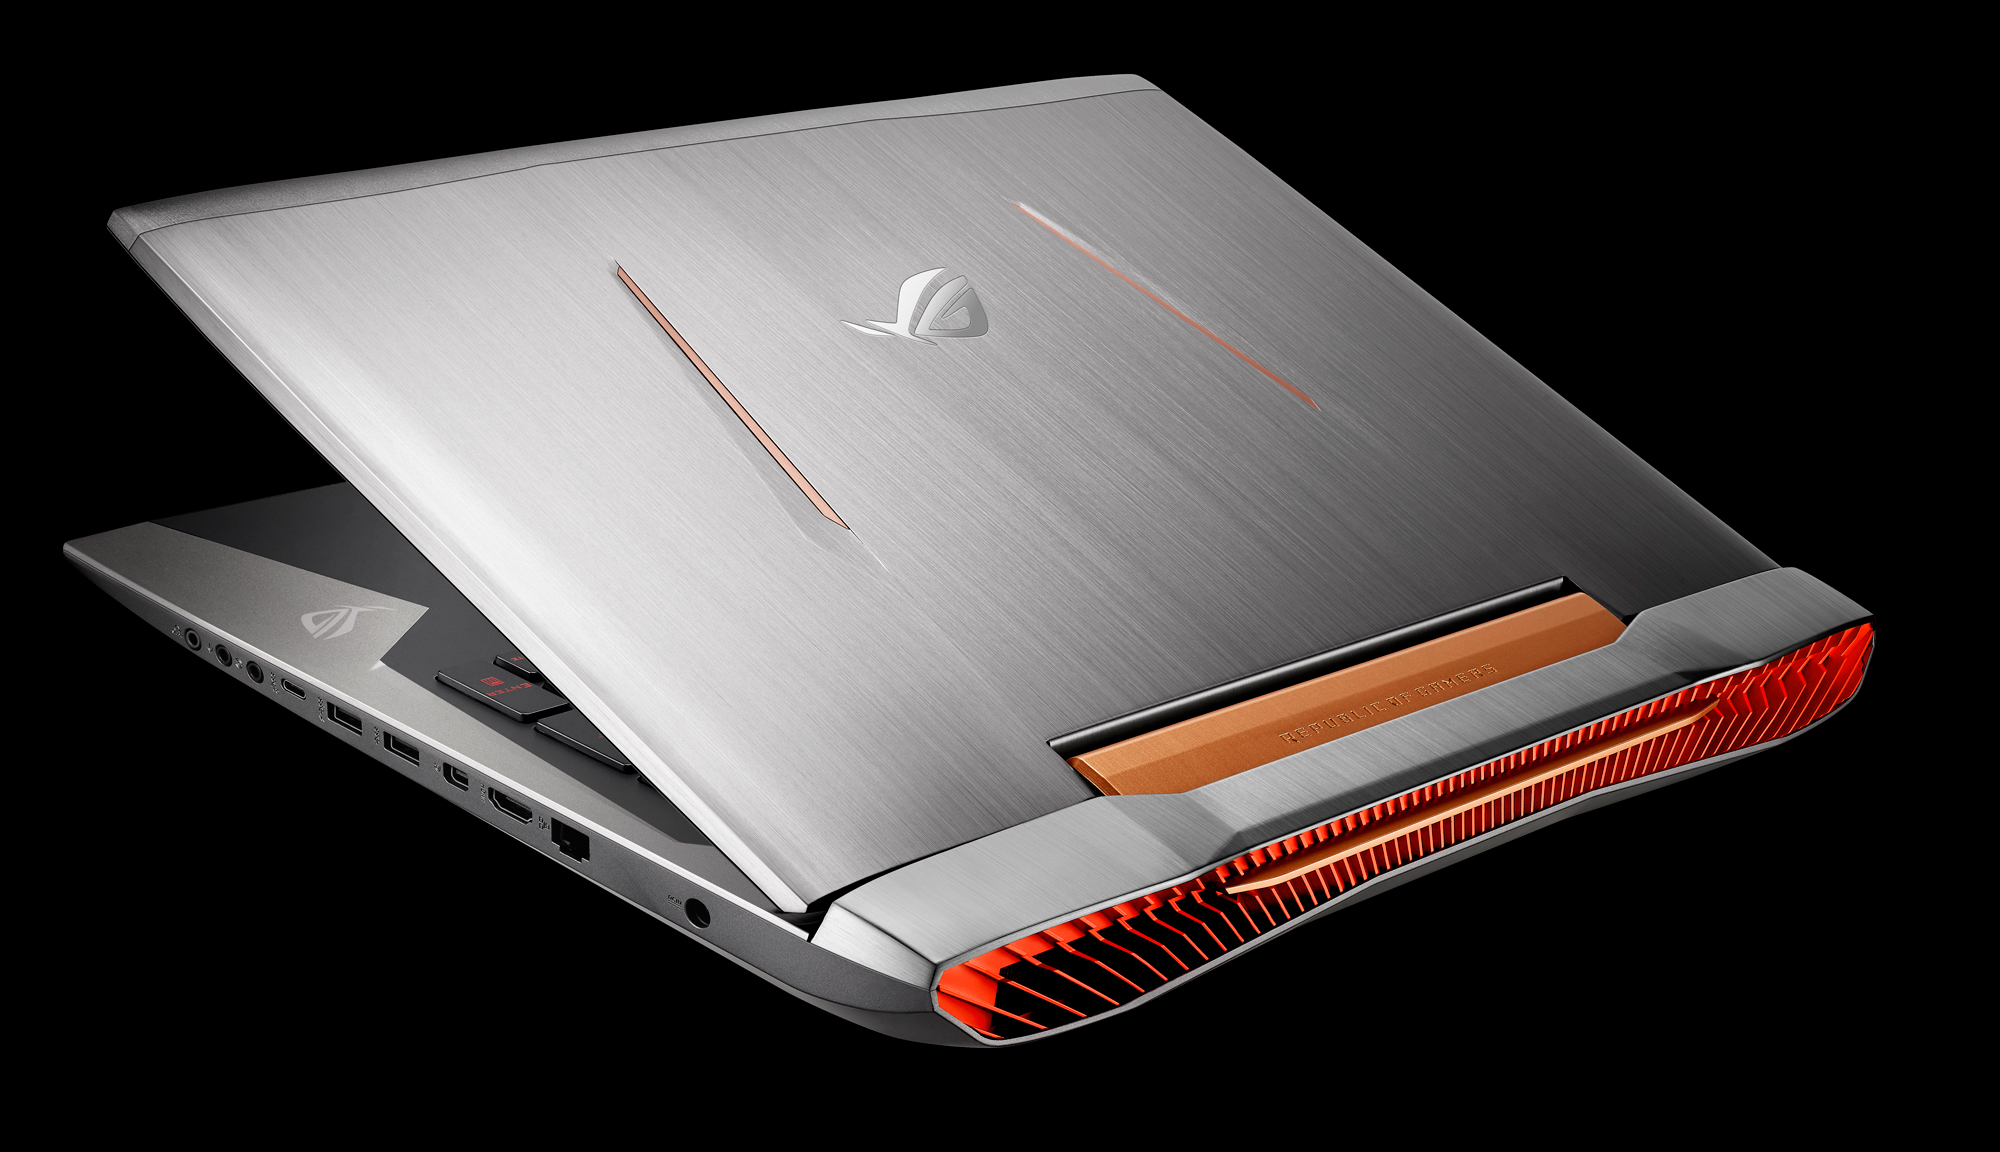 CES 2017: Republic of Gamers Announces Latest Gaming Laptops with 7th